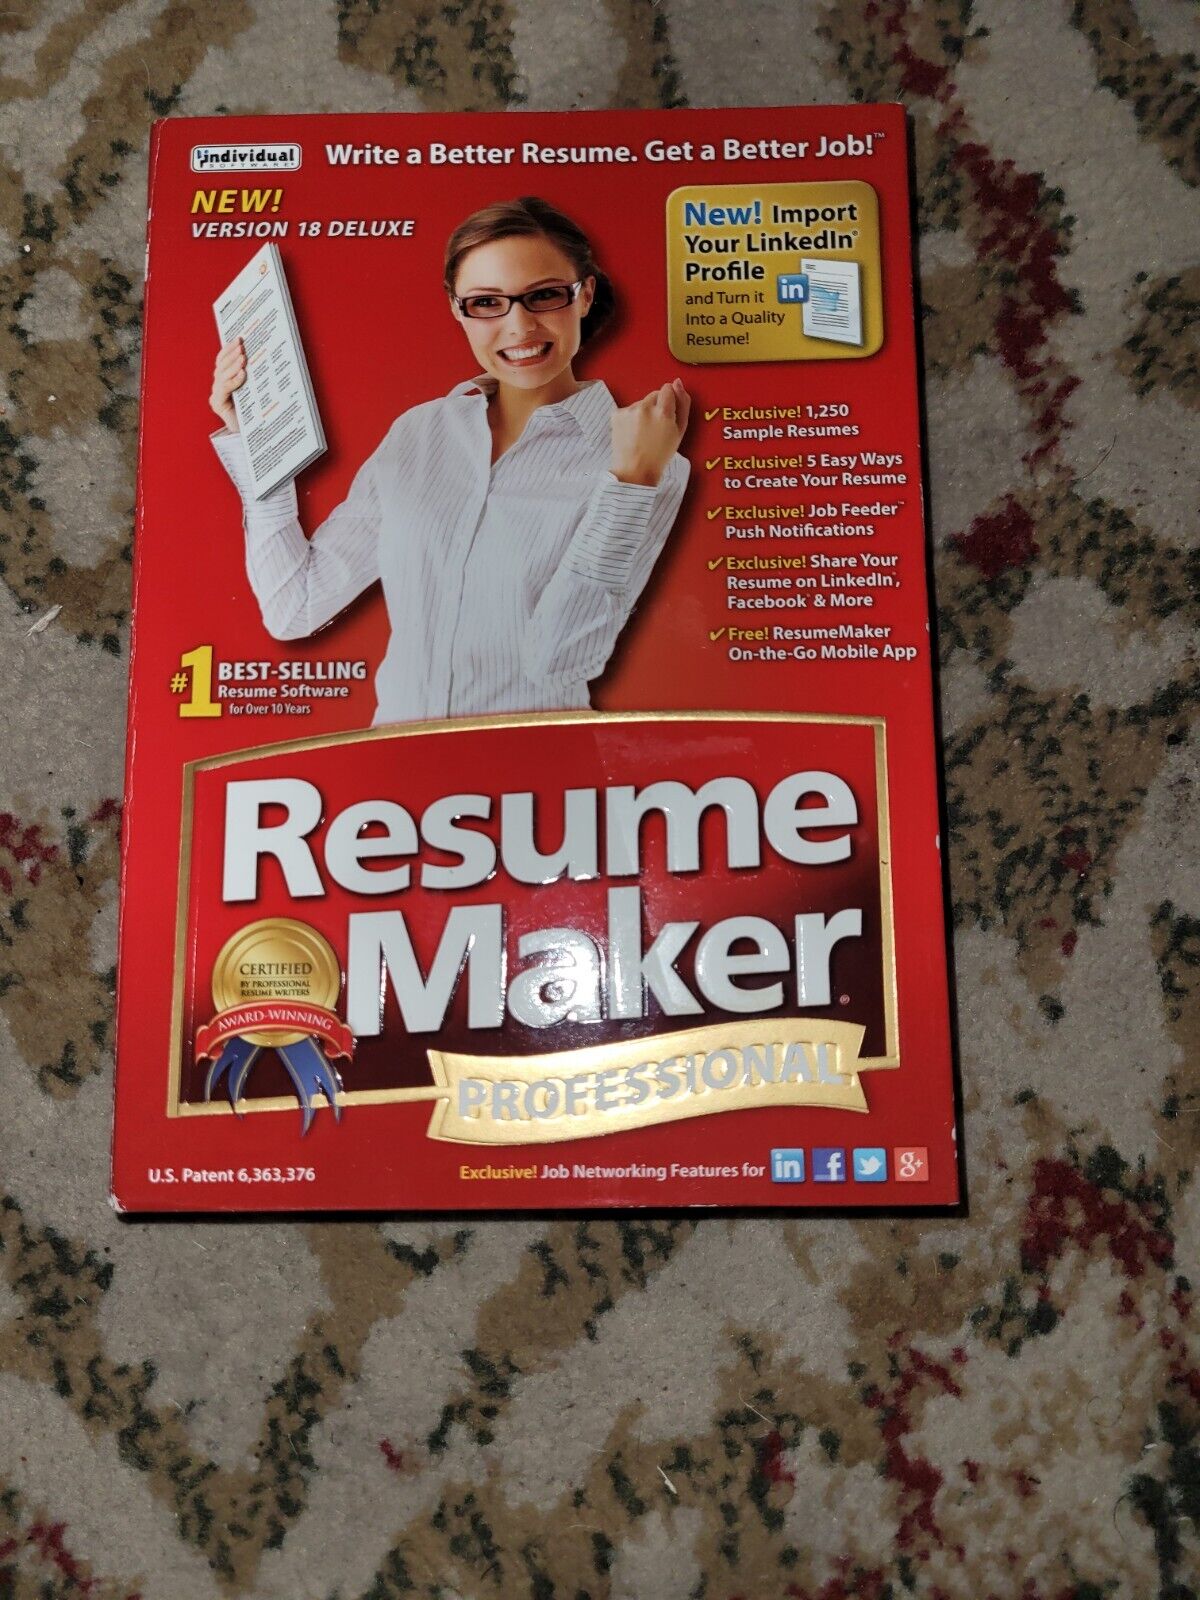 Individual Resume Maker Professional - Full Version for Windows PMM-R17 new